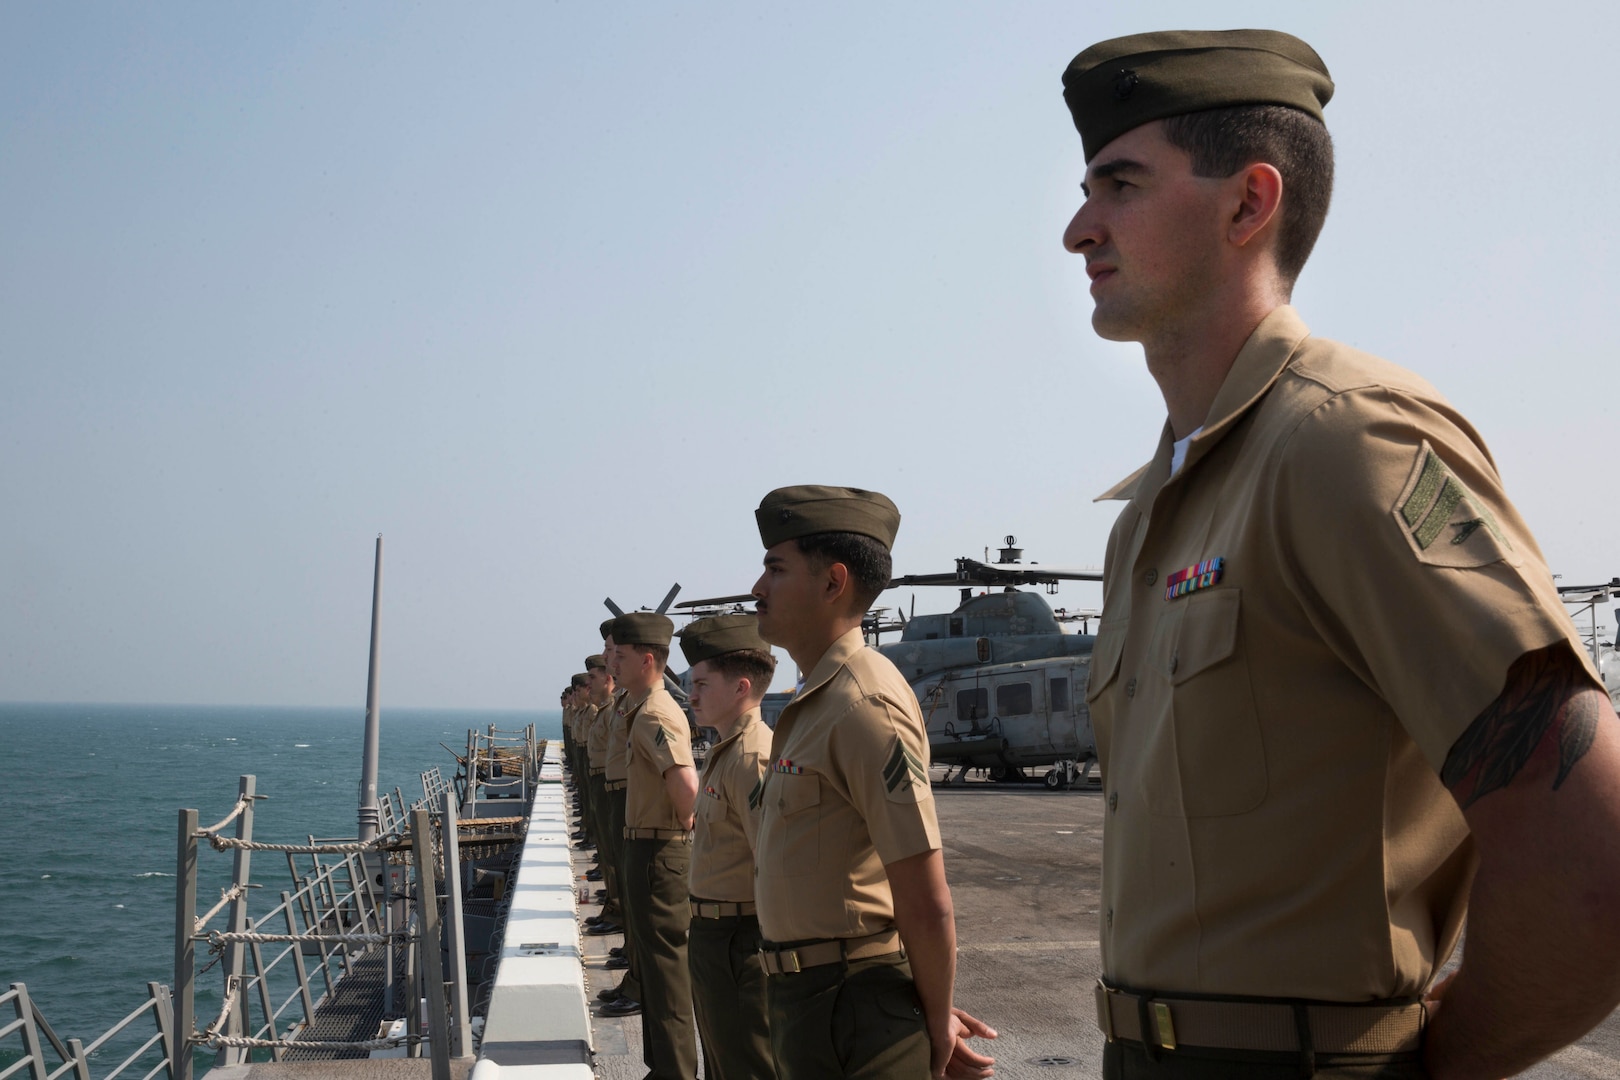 U.S. Marines with the 13th Marine Expeditionary Unit (MEU), man the rails of the San Antonio-class amphibious transport dock USS Anchorage (LPD 23), Dec. 22, 2018. The Anchorage, assigned to the Essex Amphibious Ready Group (ARG), is conducting a partnership strengthening visit to Visakhapatnam, India.  The Essex ARG and 13th MEU are a capable and lethal Navy-Marine Corps team deployed to the U.S. 7th Fleet area of operations to support regional stability, reassure partners and allies and maintain a presence postured to respond to any crisis ranging from humanitarian assistance to contingency operations.